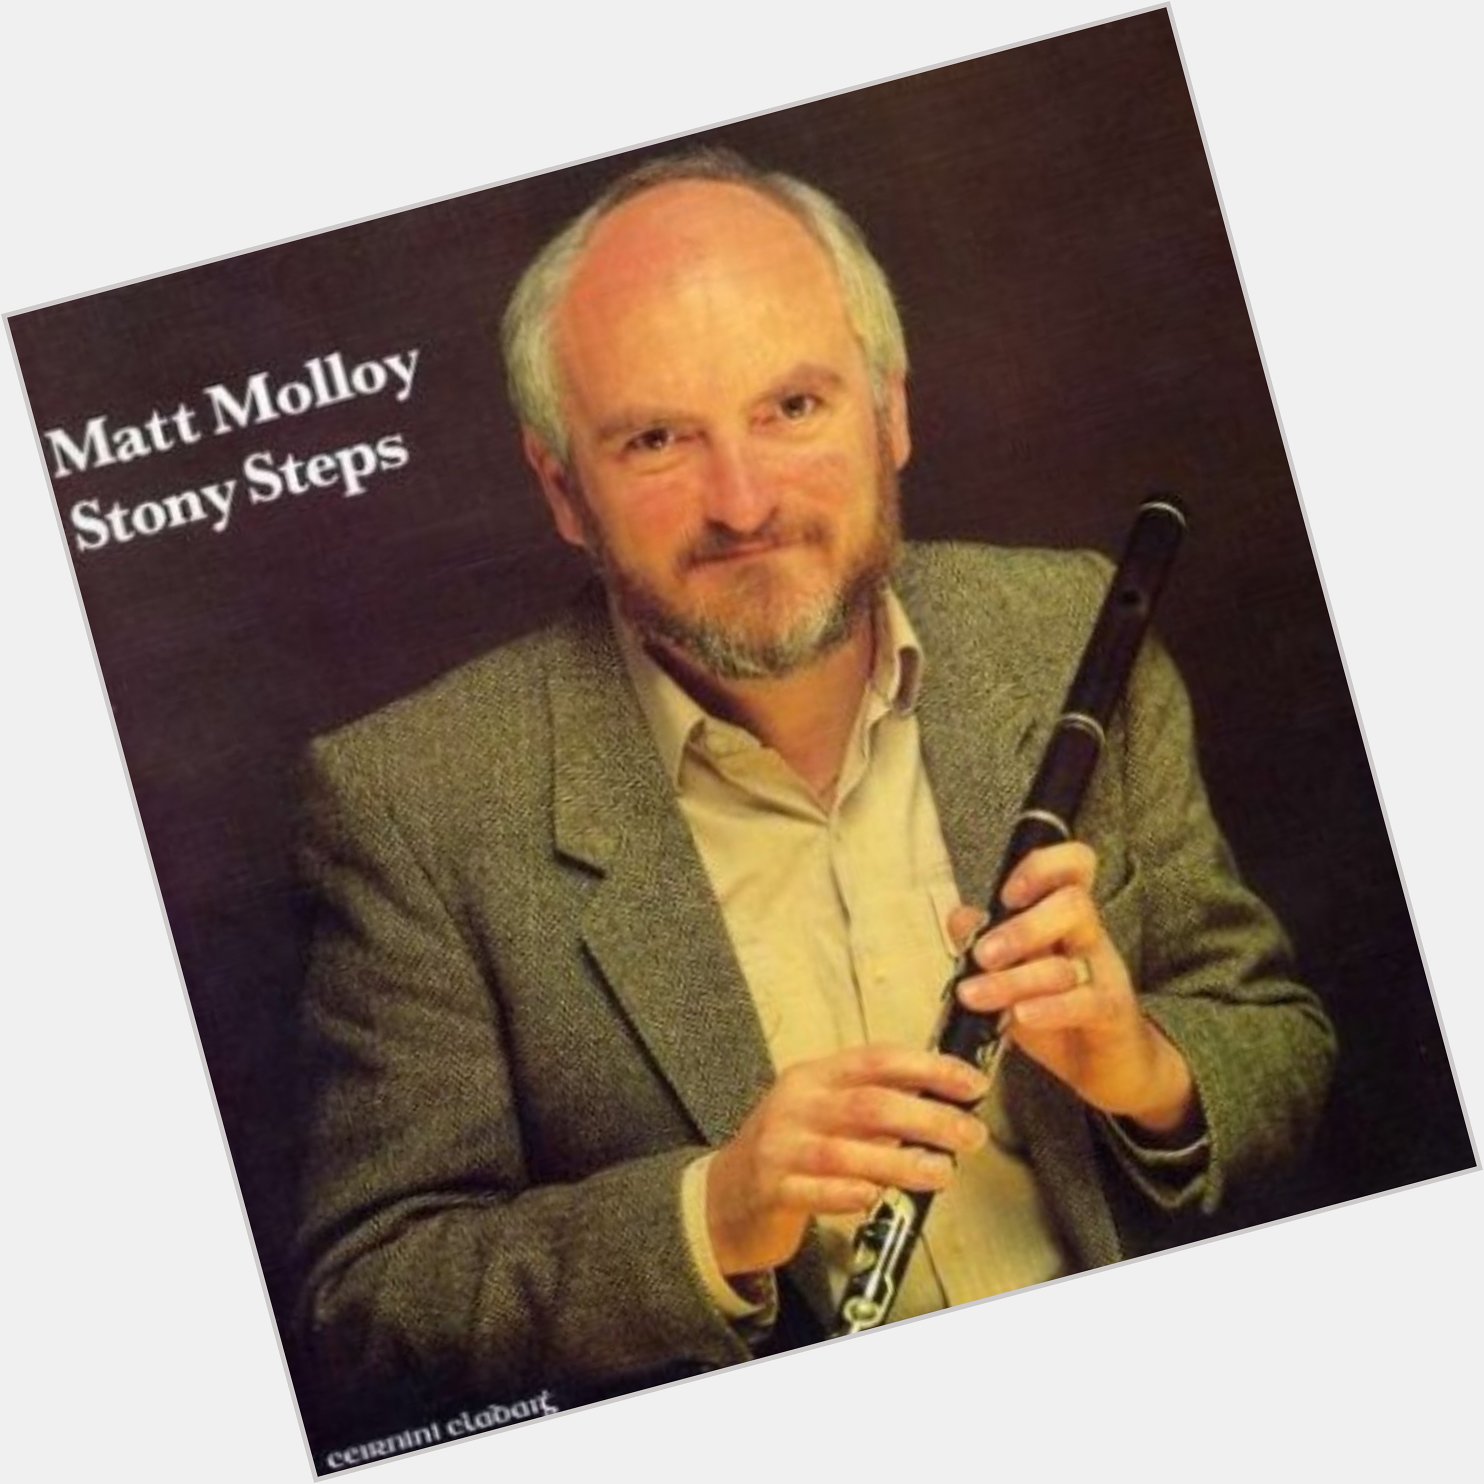 Happy Birthday to the one and only Matt Molloy!  